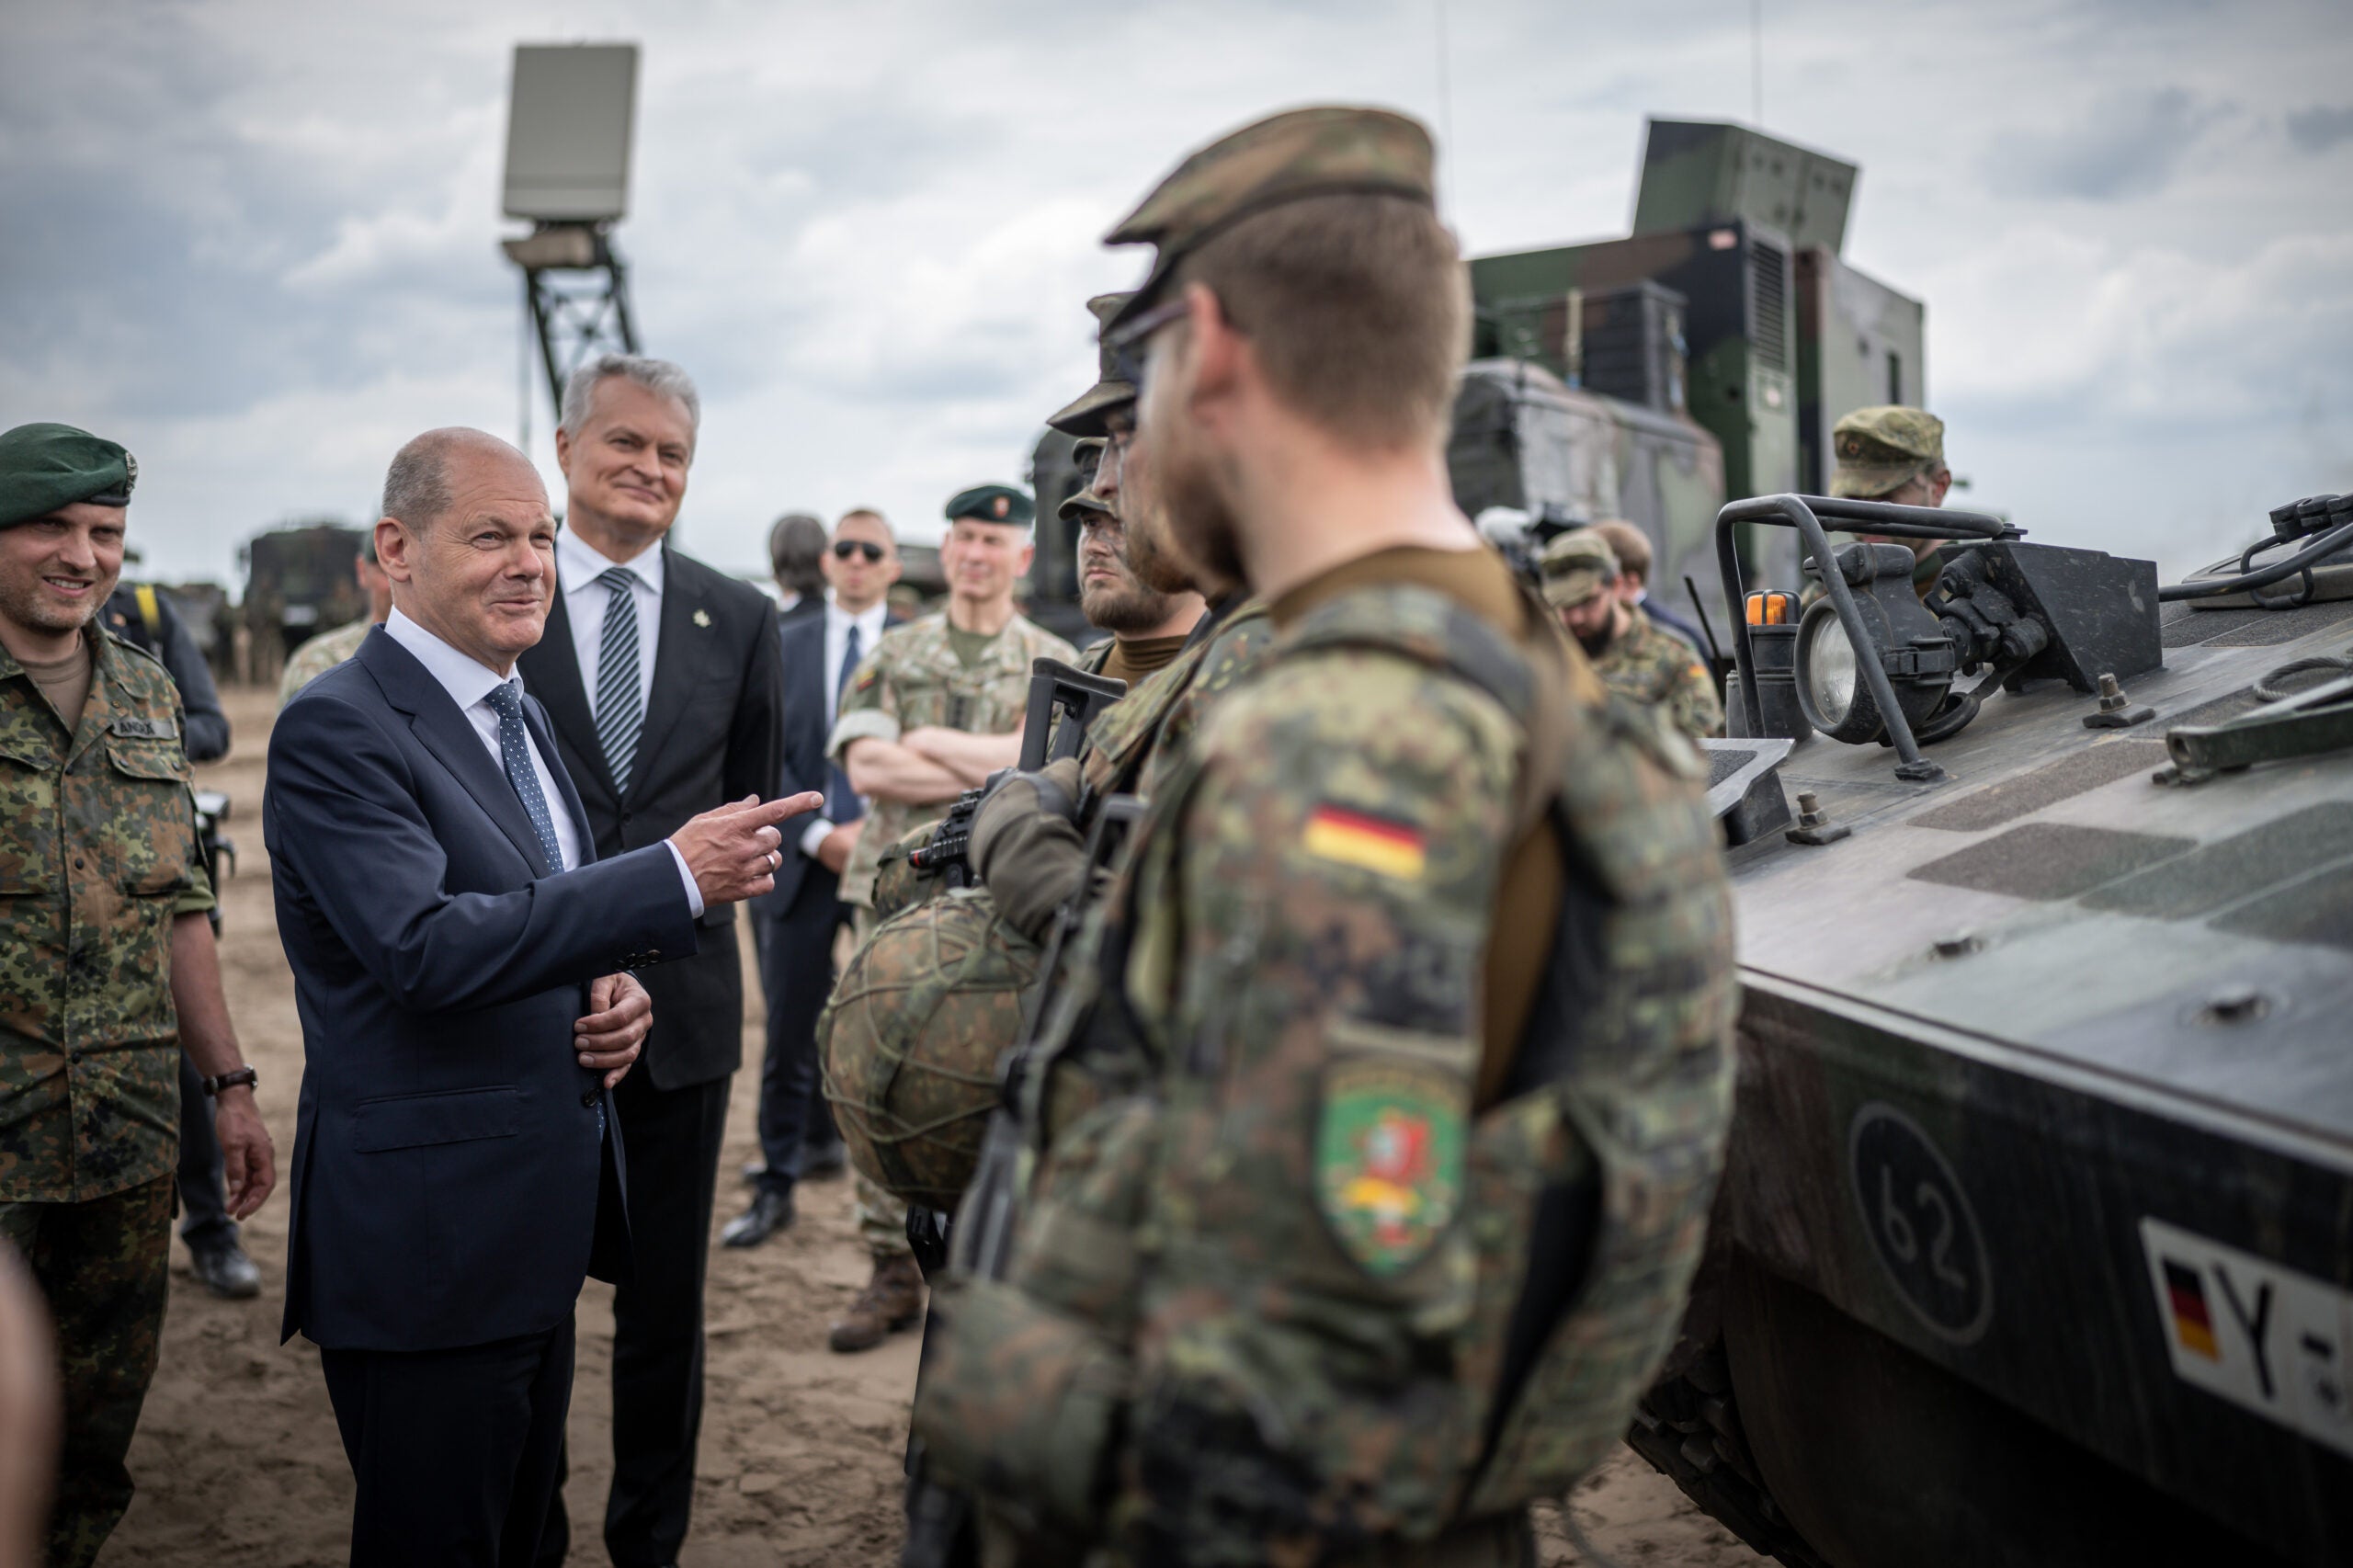 07 June 2022, Lithuania, Pabrade: German Chancellor Olaf Scholz (SPD, M), speaks with soldiers alongside Daniel Andrä, Bundeswehr commander of the NATO Enhanced Forward Presence Battle Group (eFP battalion, l) and Gitanas Nauseda, President of Lithuania (3rd from left), at Camp Adrian Rohn, where more than 1,000 Bundeswehr soldiers are stationed. Scholz has promised Lithuania additional military support to defend against a possible Russian attack. Photo: Michael Kappeler/dpa (Photo by Michael Kappeler/picture alliance via Getty Images)